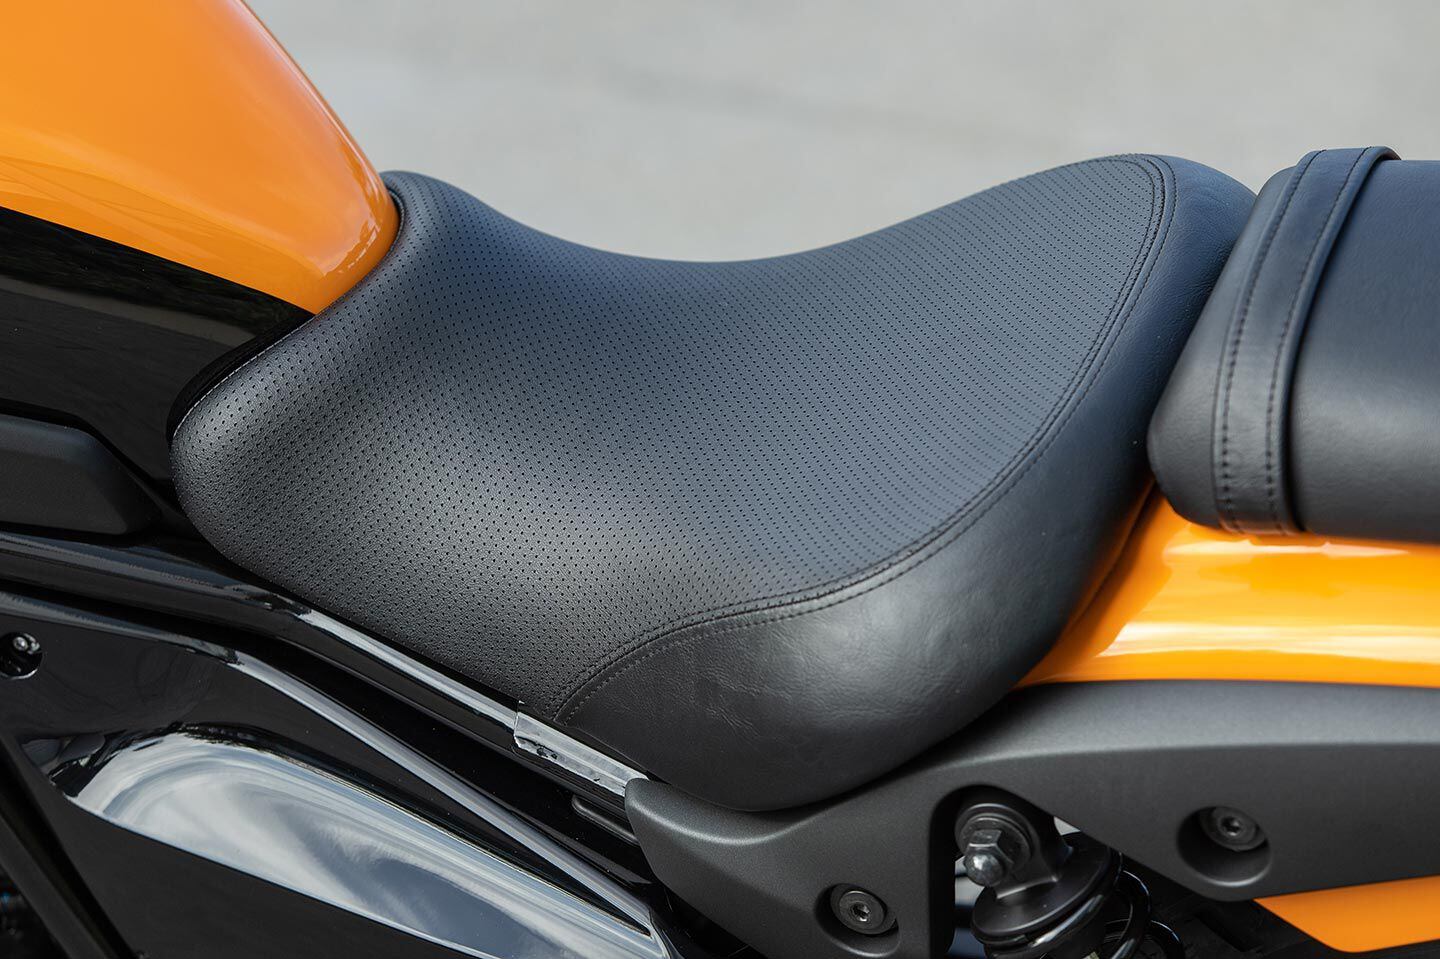 Specific to the Eliminator SE is a two-pattern leather seat with top-edge stitching.